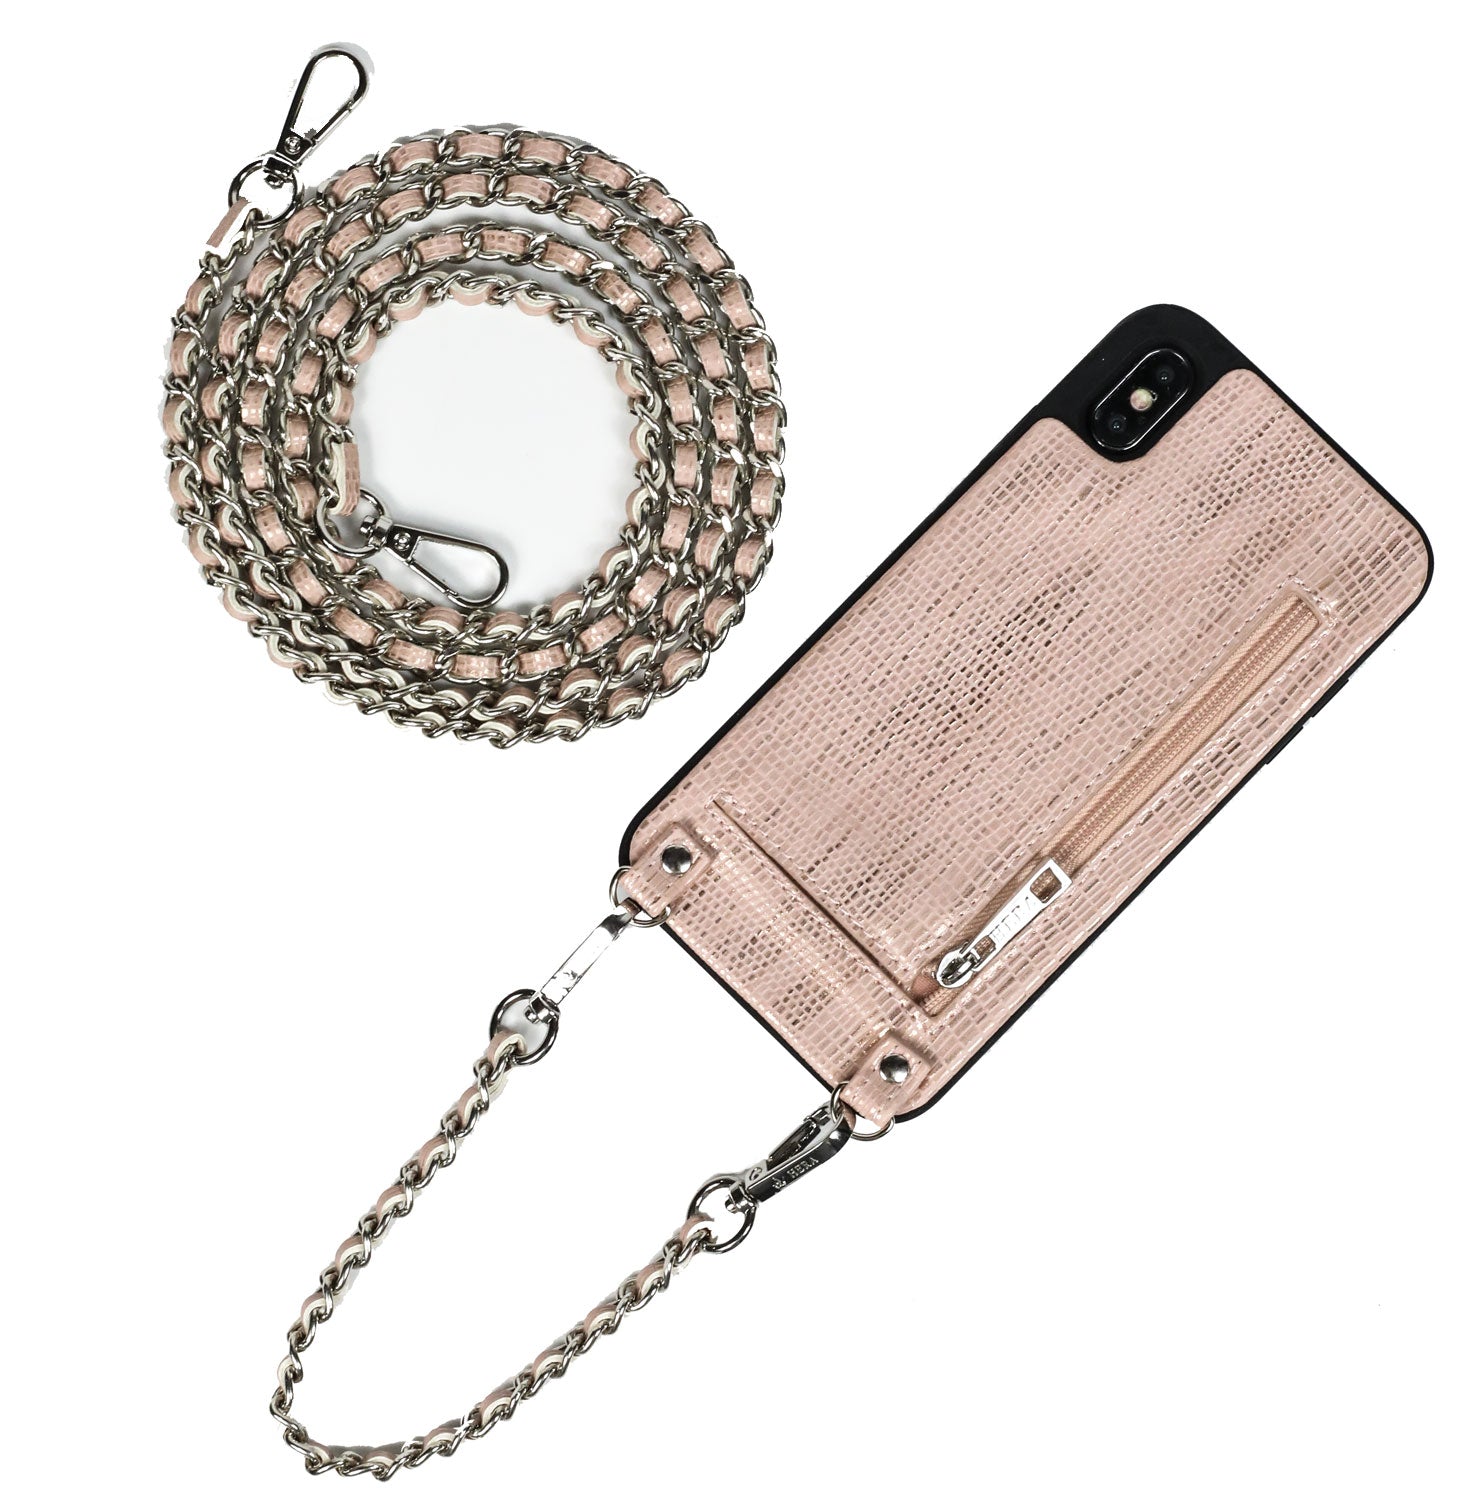 VICTORIA Crossbody Wallet Case for iPhone 7/8 Plus with Chain